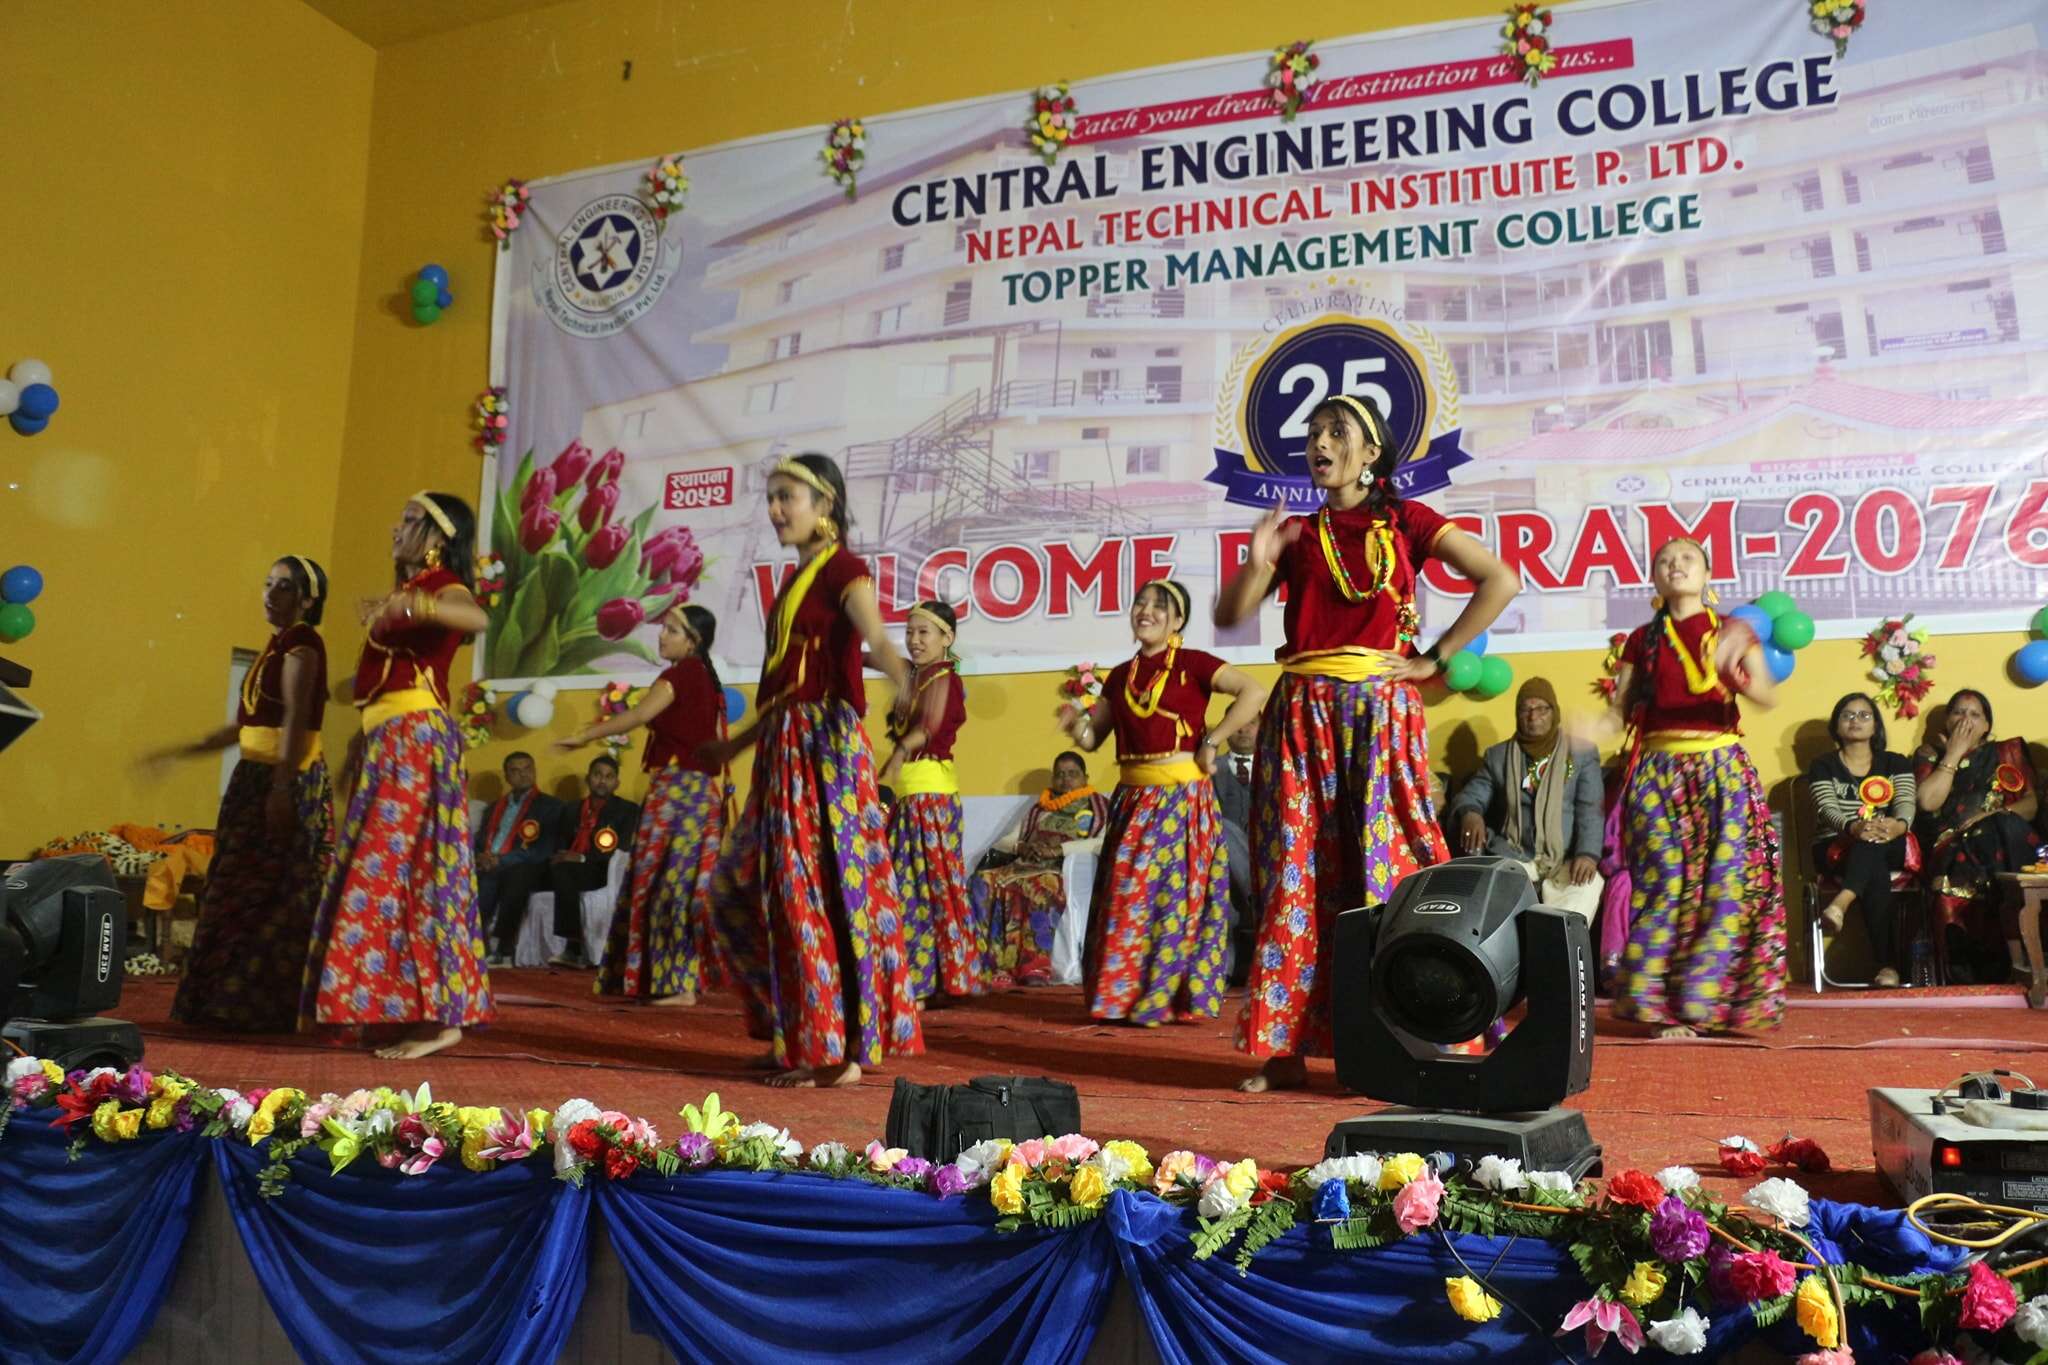 Central Engineering College